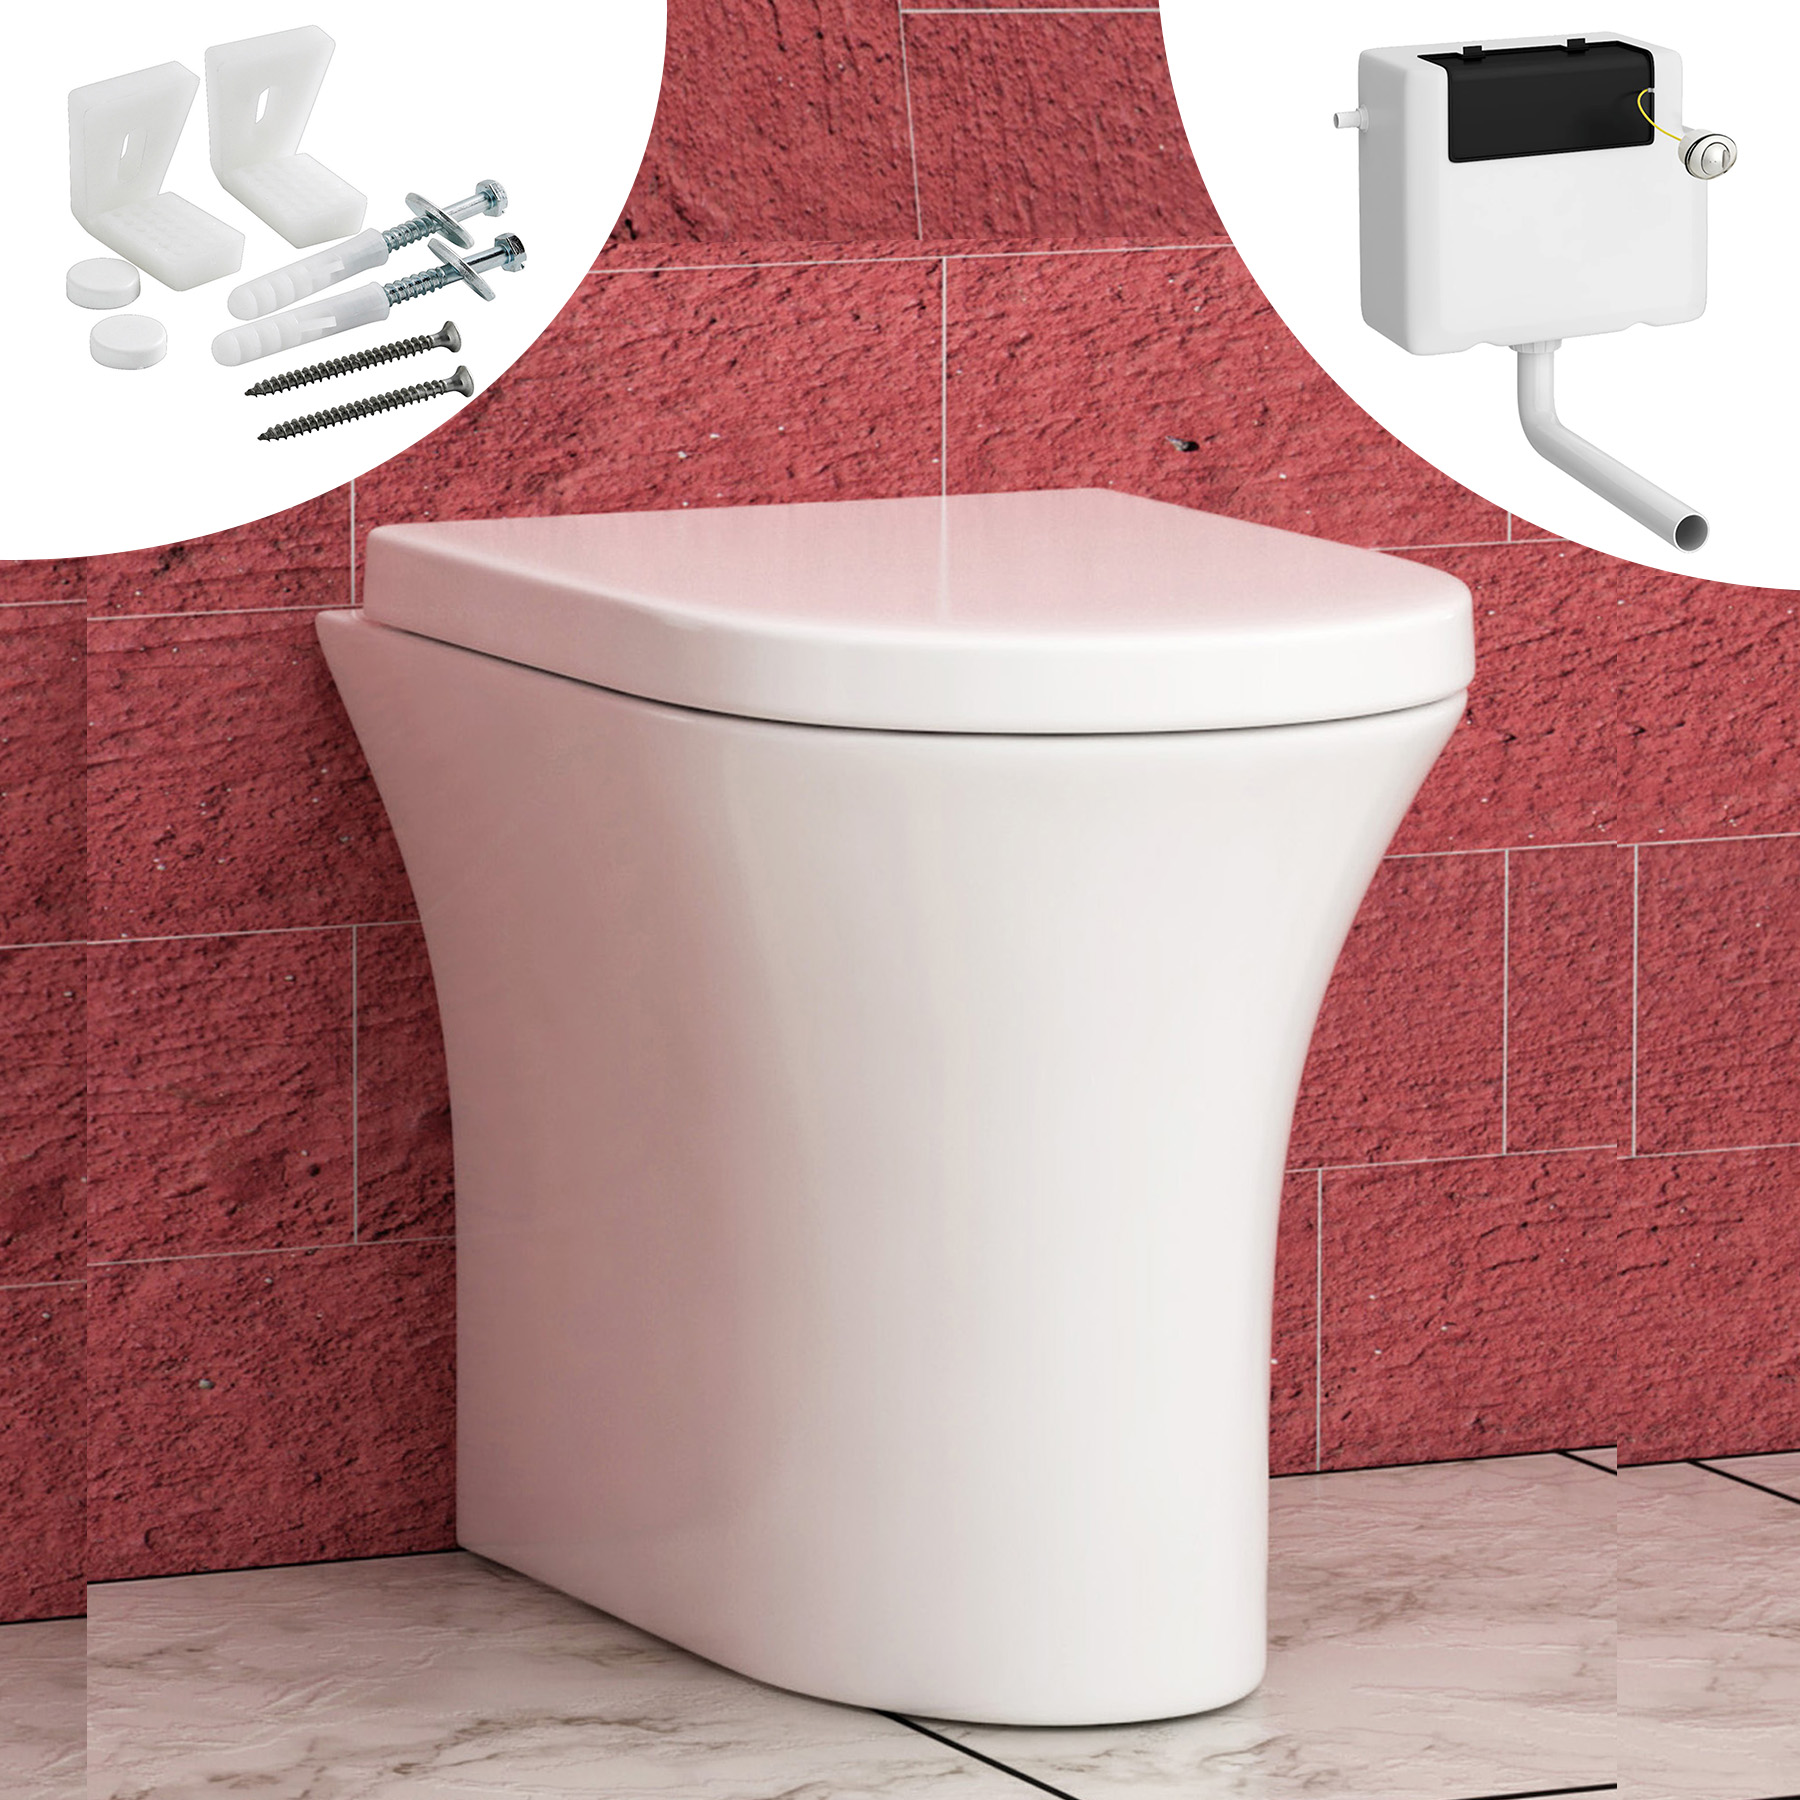 Breeze BTW Back to Wall Ceramic Toilet Pan + Soft Close Seat & Concealed Cistern eBay